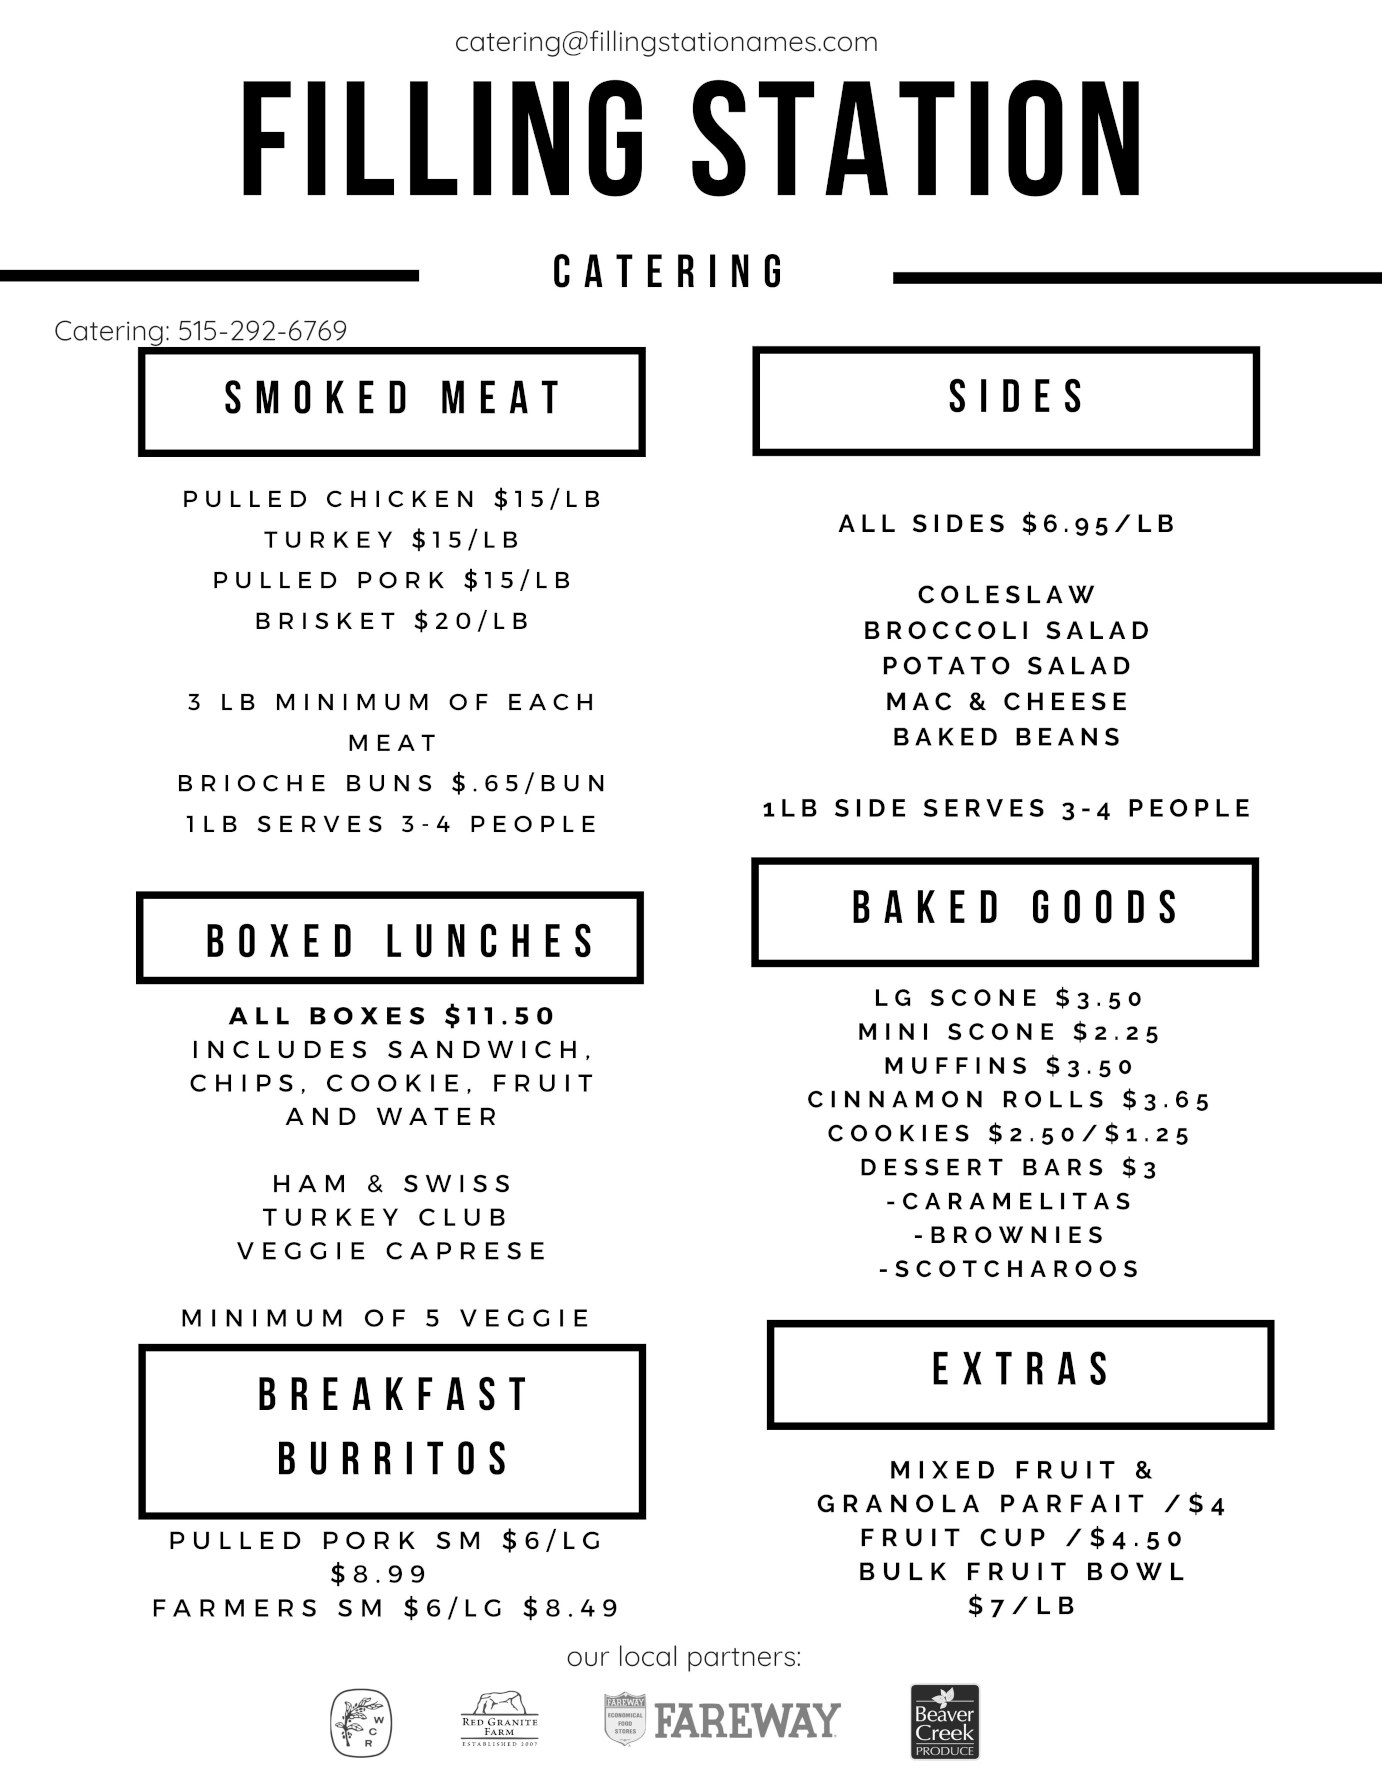 The Filling Station catering menu photo